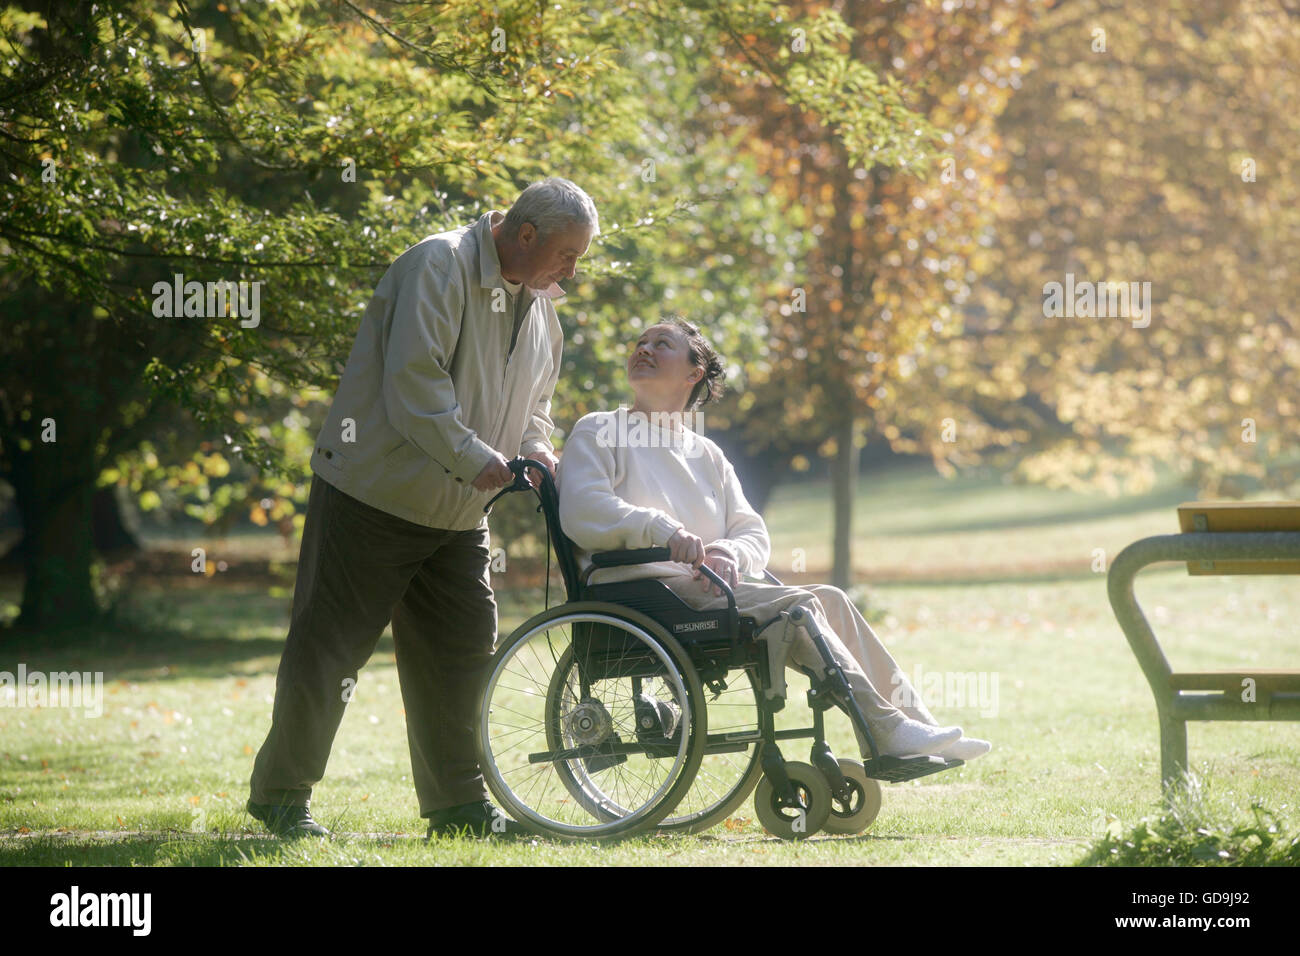 Man pushing awoman in a wheelchair in a park Stock Photo